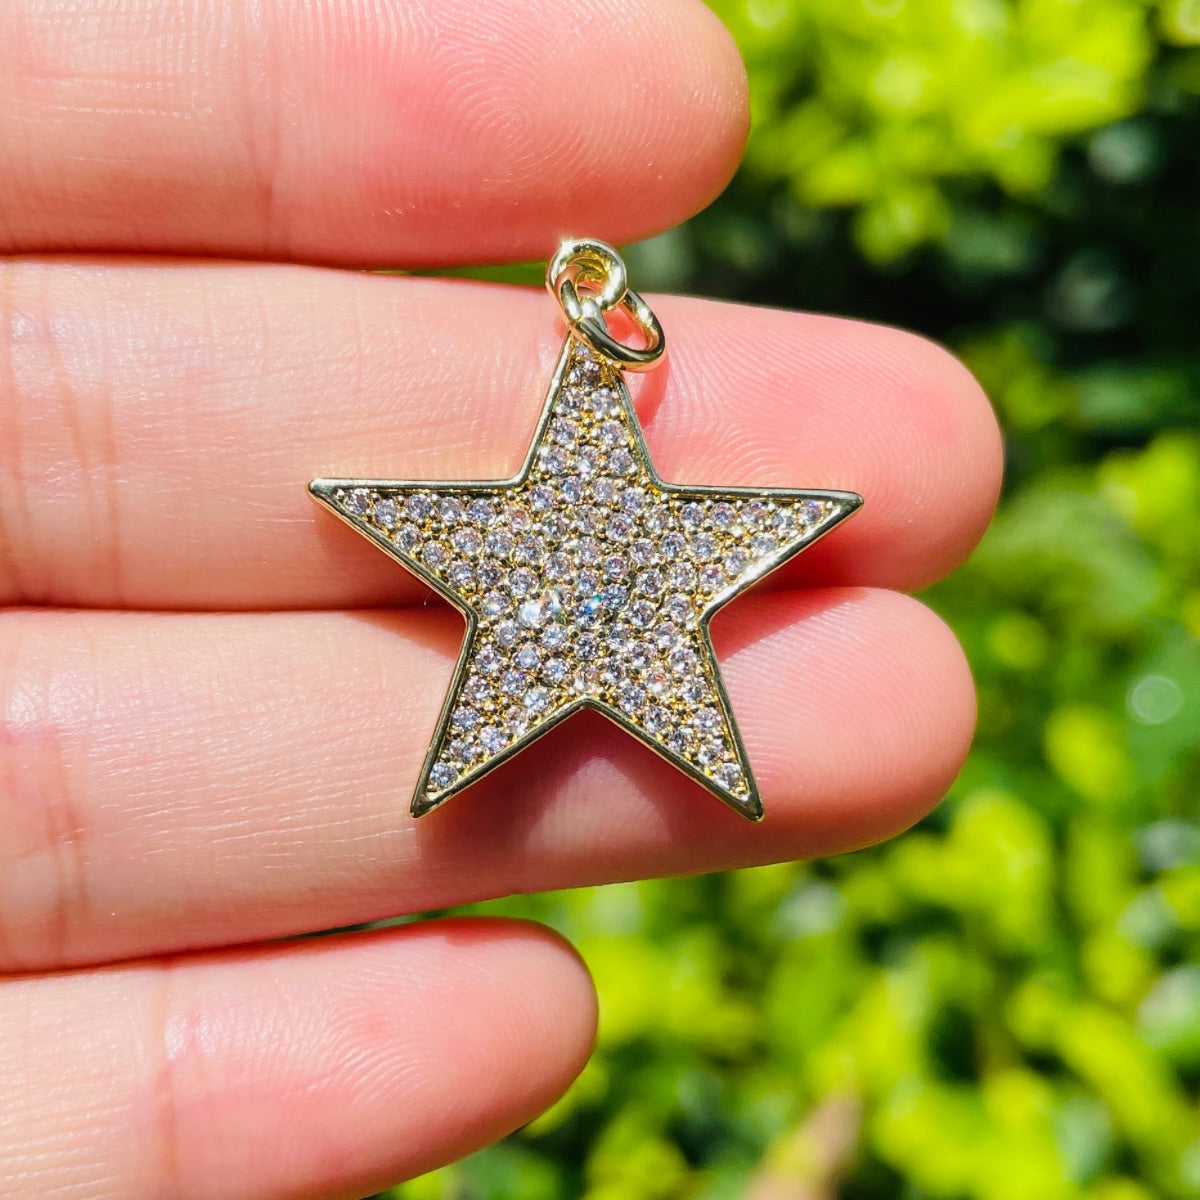 10pcs/lot 26.5*24.5mm CZ Paved Star Charms CZ Paved Charms New Charms Arrivals Sun Moon Stars Charms Beads Beyond